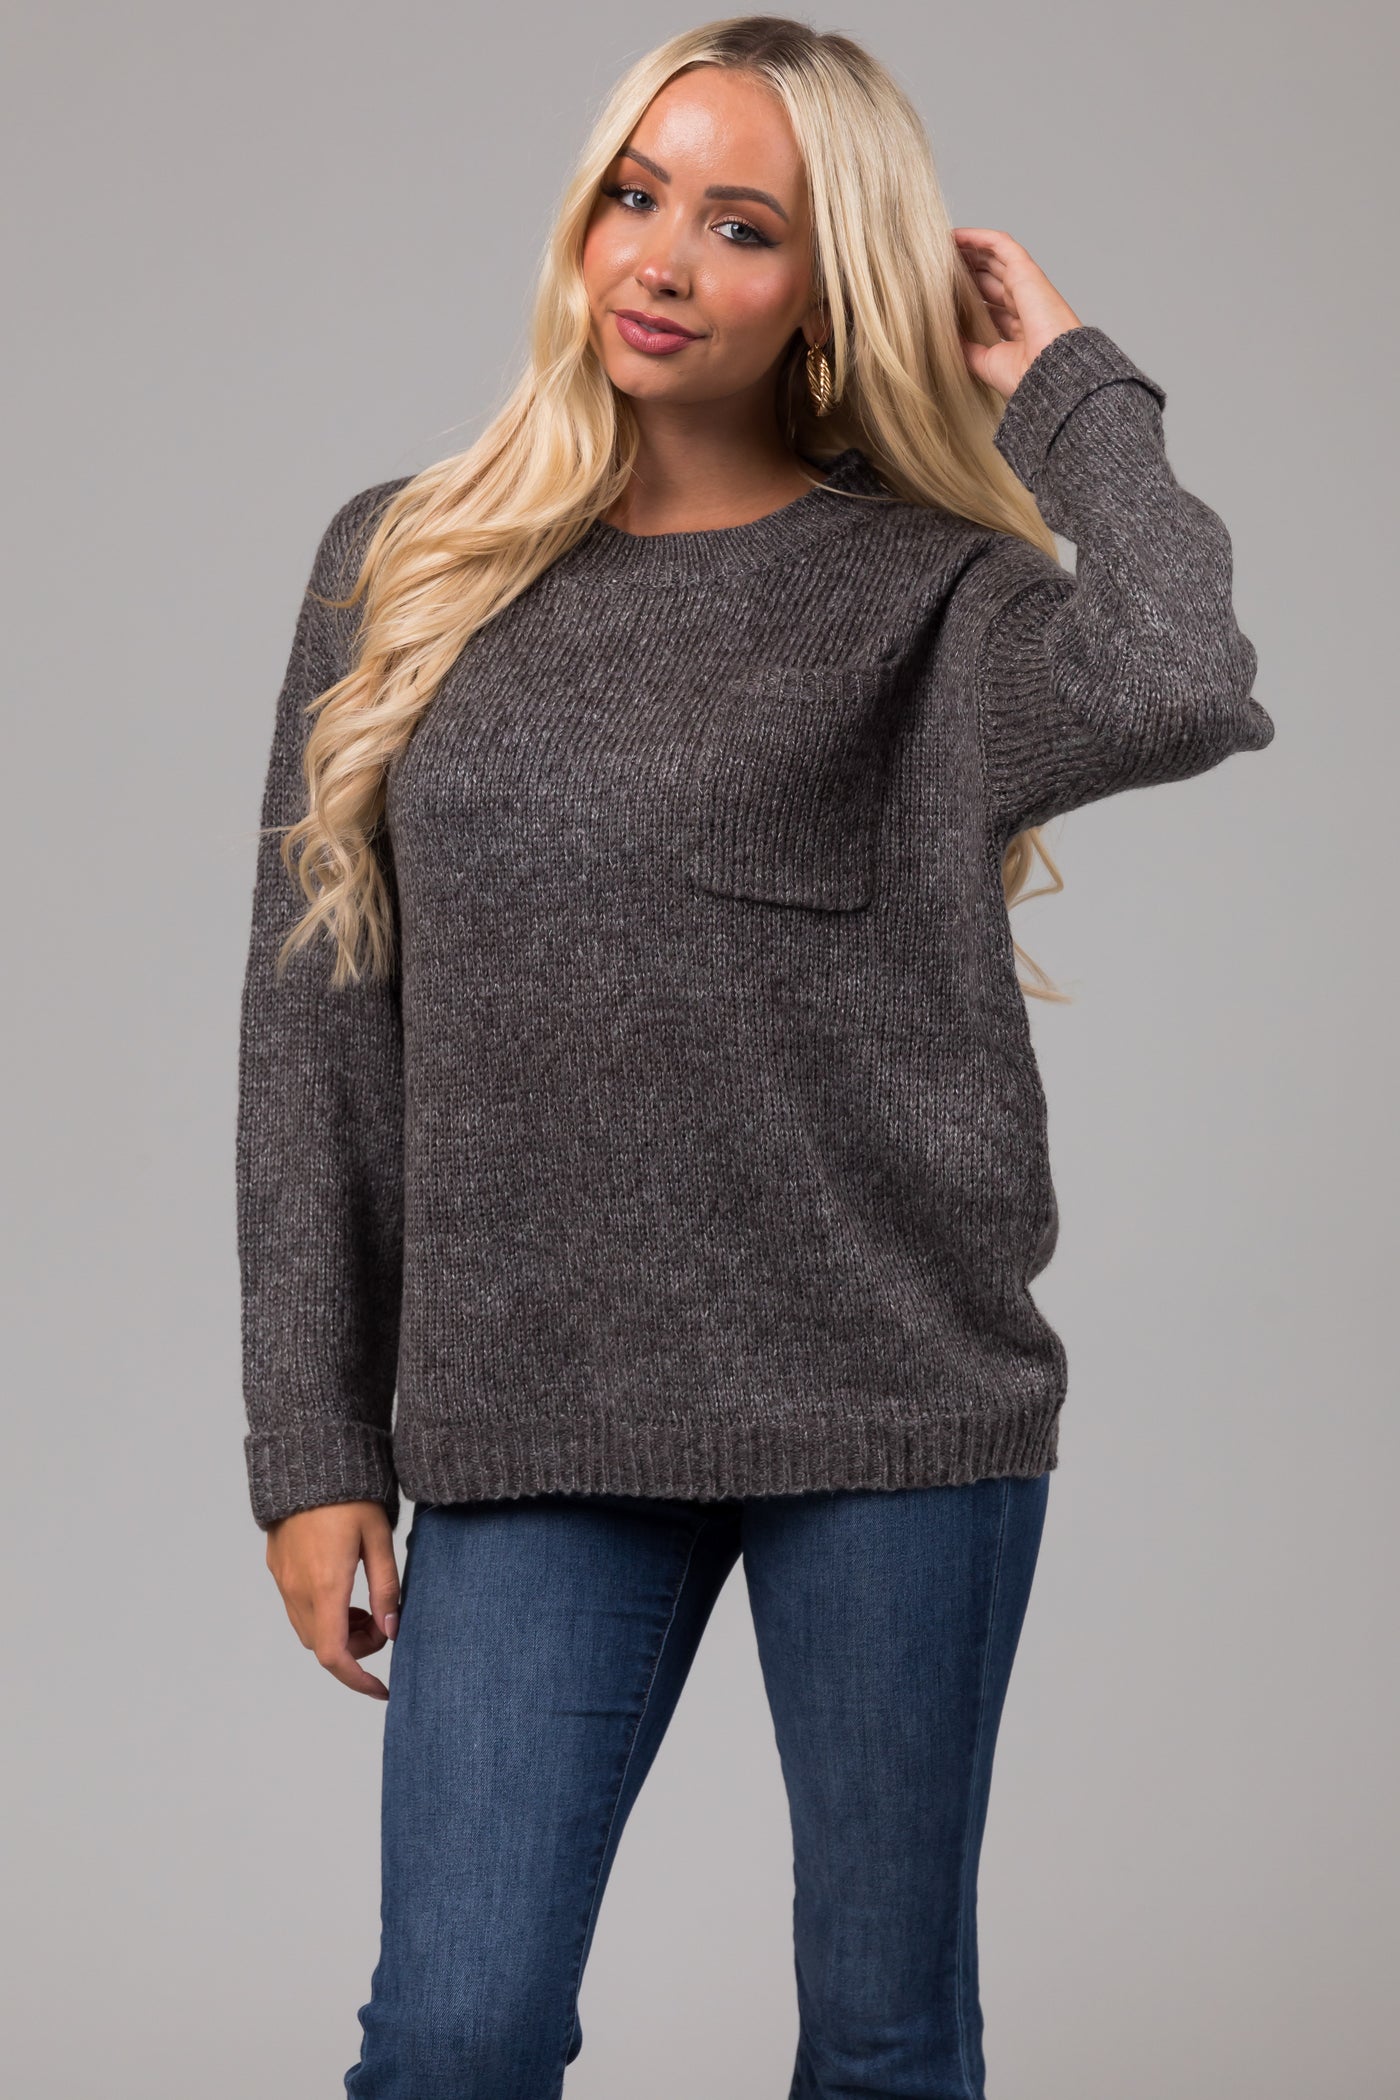 Charcoal Chest Pocket Cuffed Sleeve Sweater